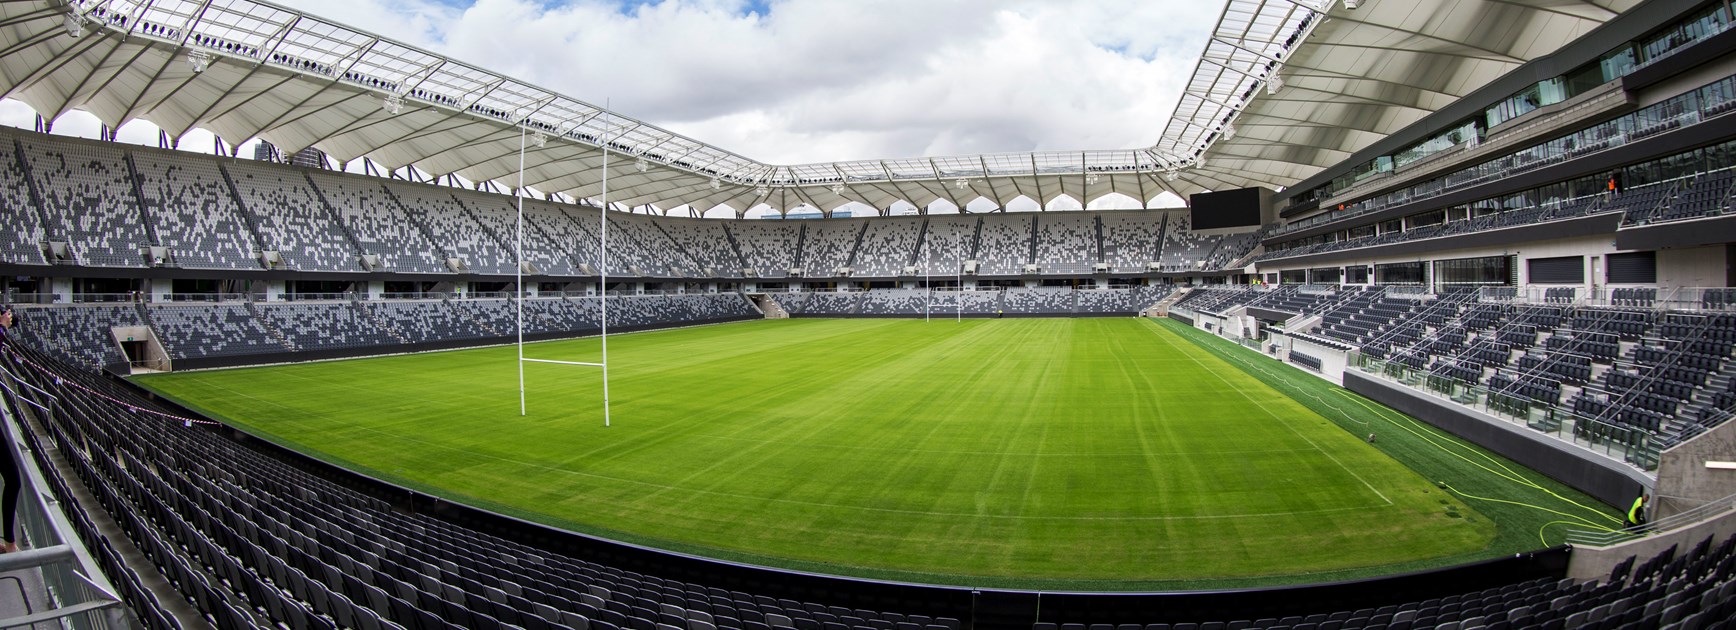 Transport included in Eels games at Bankwest Stadium